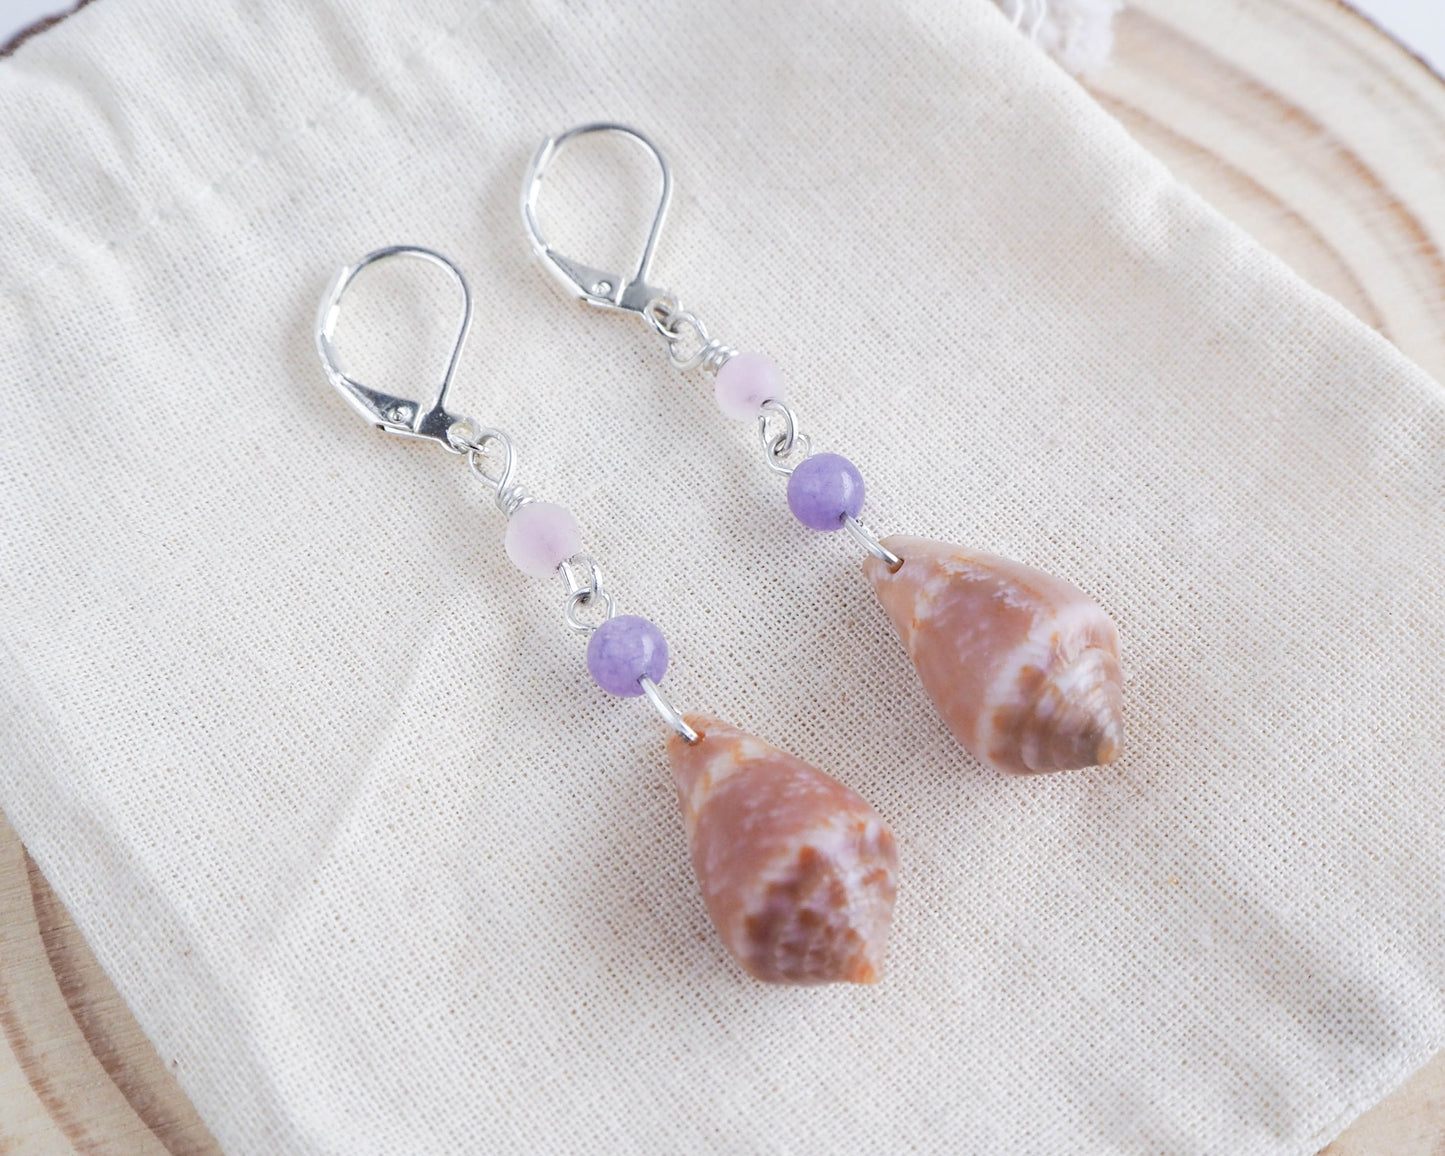 Bohemian Beach Vibes - Cone Shell Earrings with Gemstones 